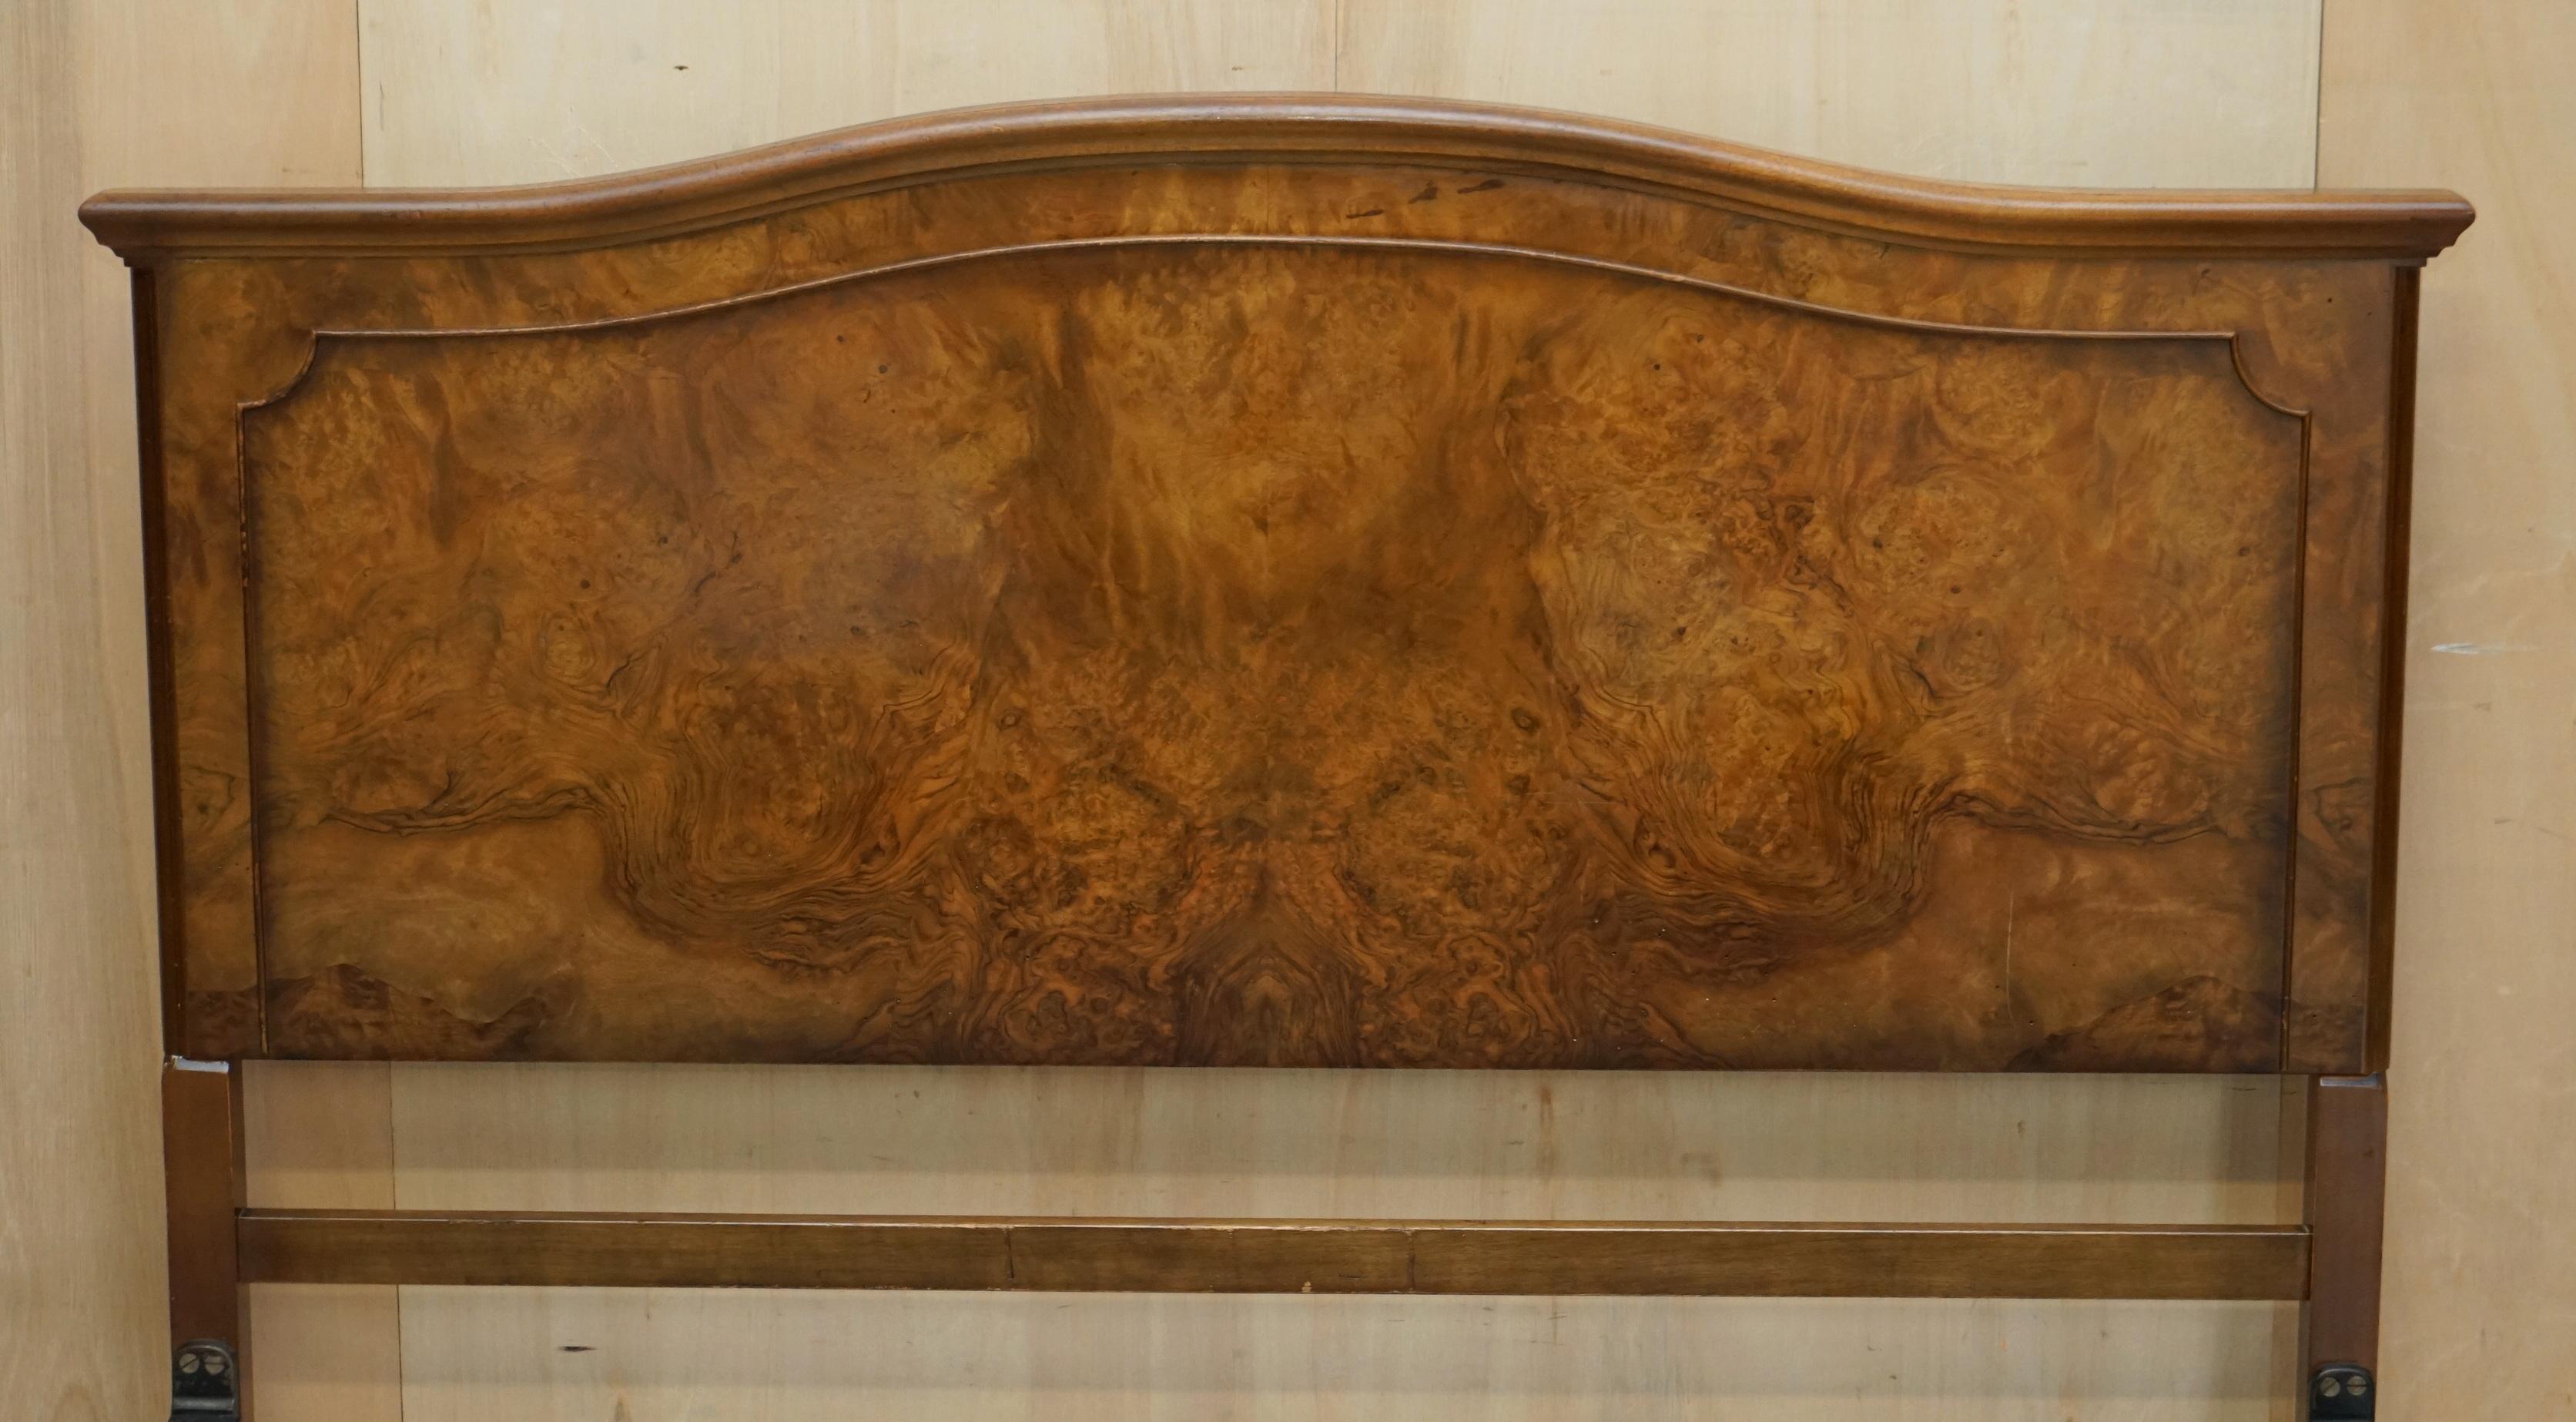 Early 20th Century Stunning Double Sized circa 1900 Burr Walnut English Bedstead Frame Part Suite For Sale